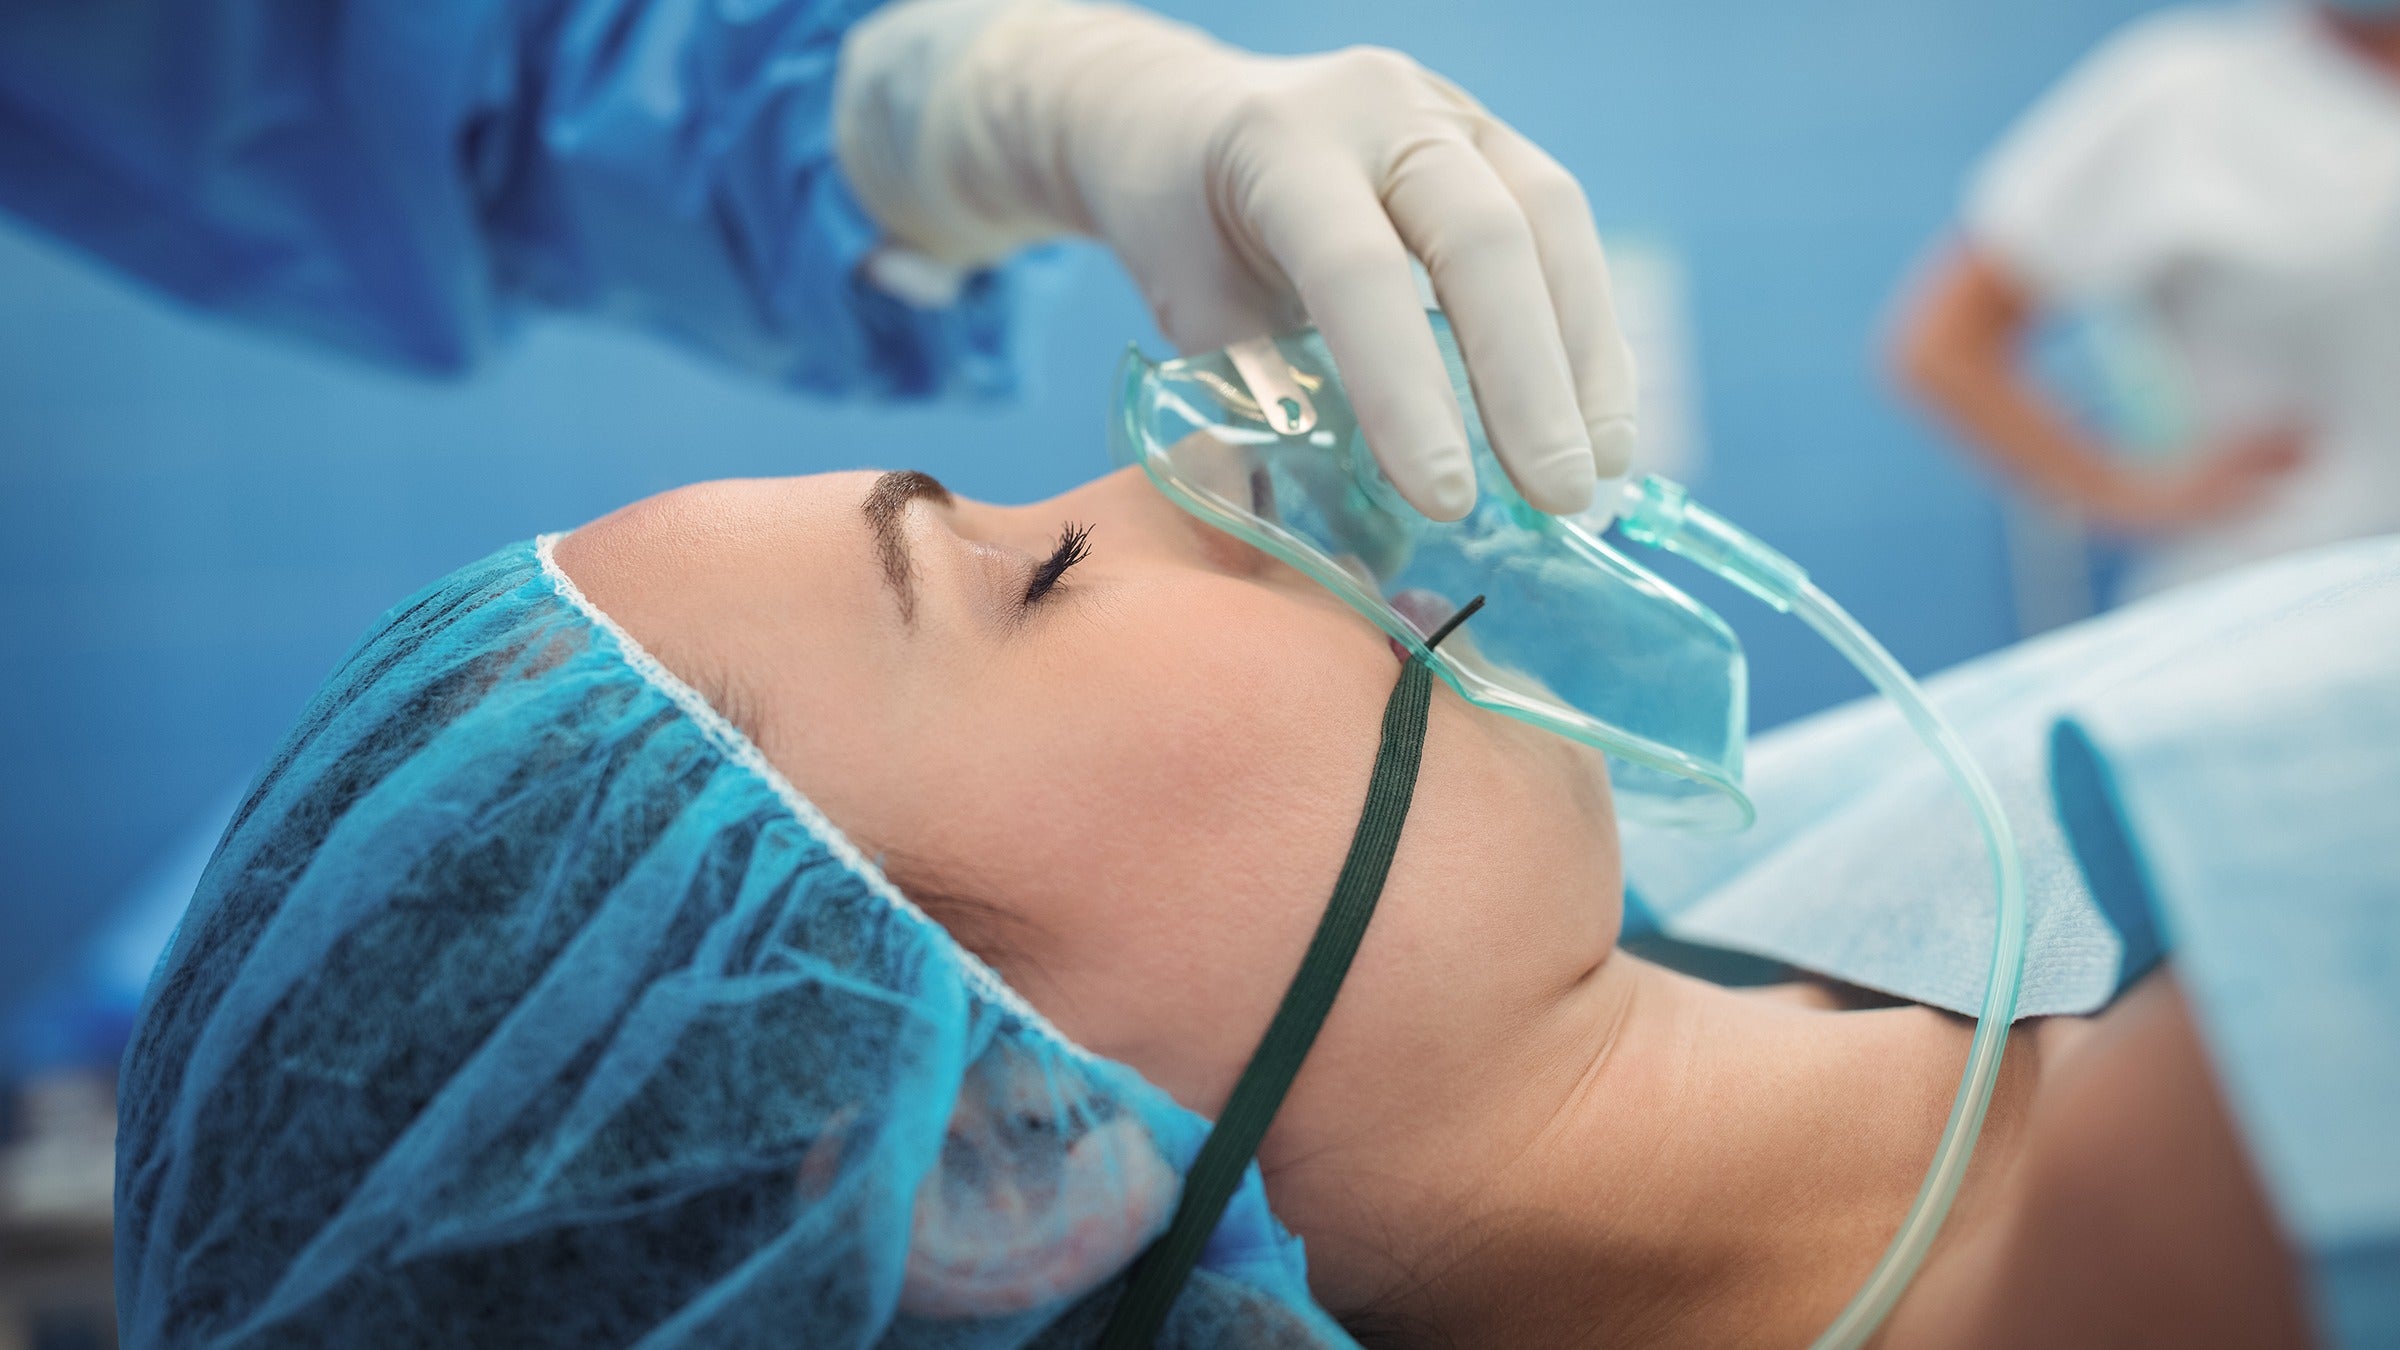 What Risks Are Associated With Anesthesia? - GoodRx